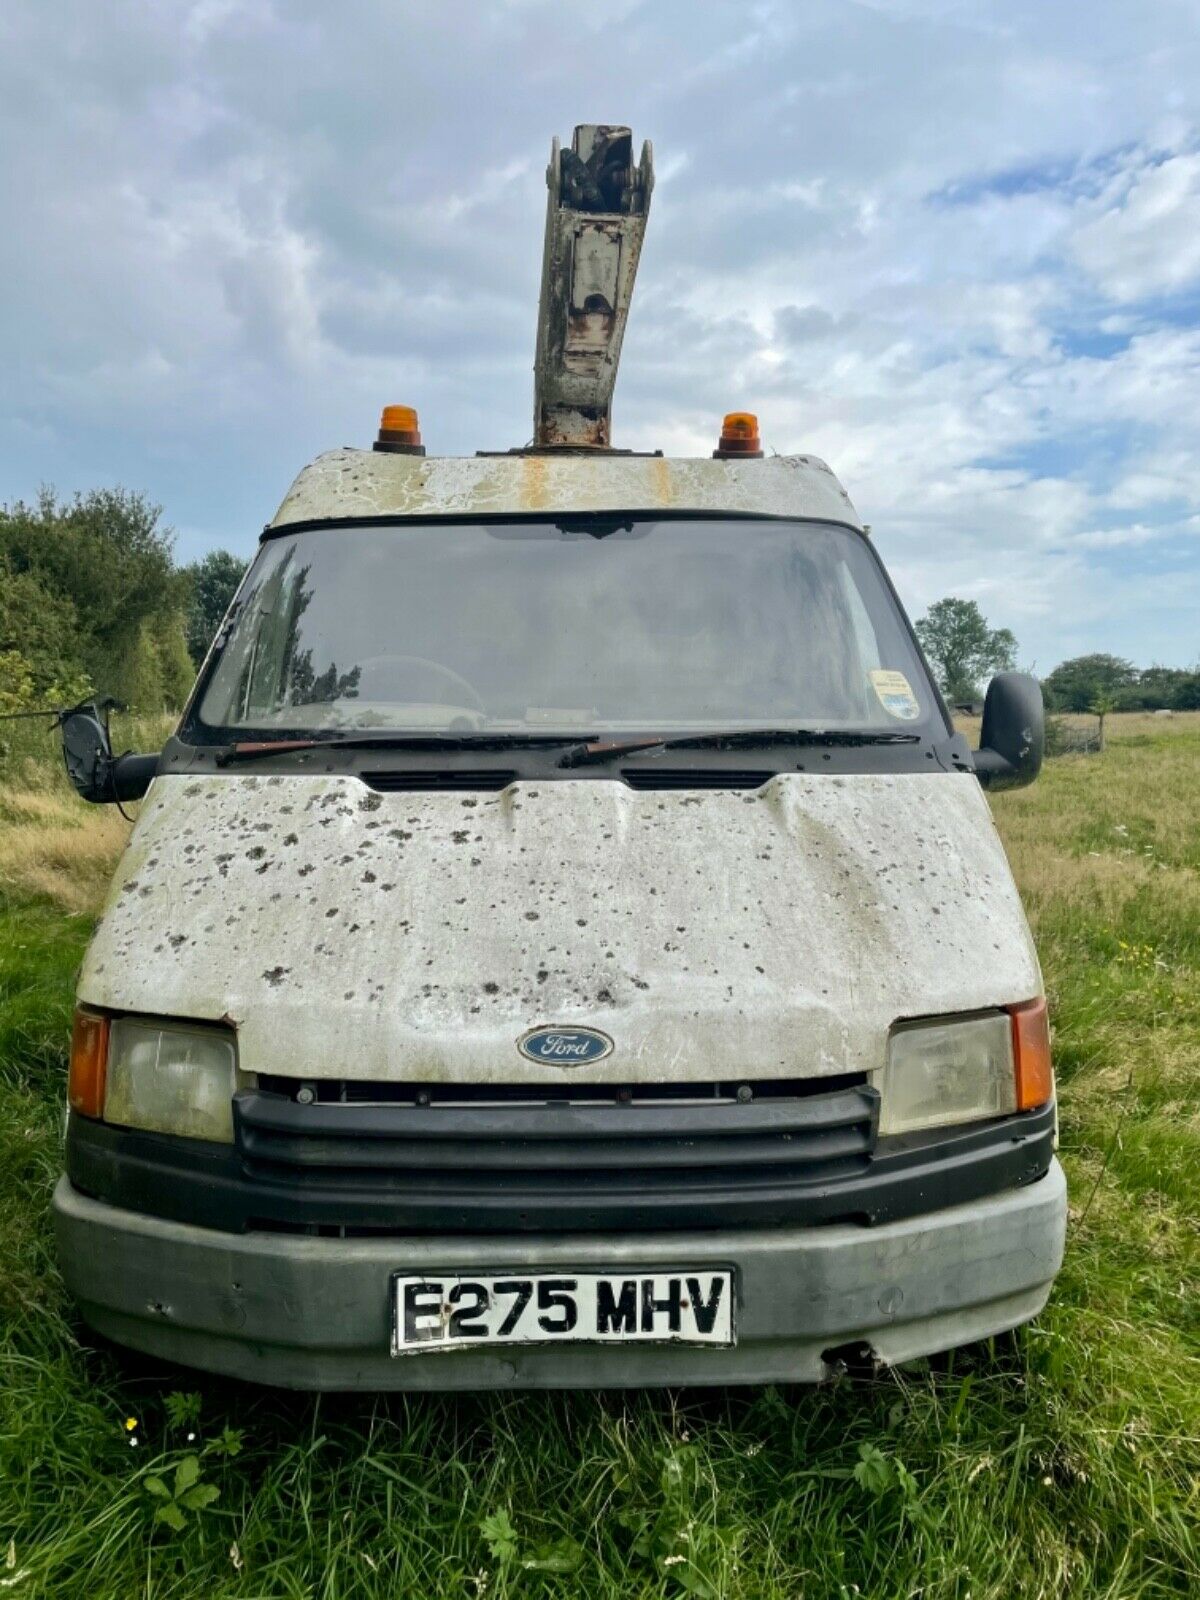 1987 Ford Transit County 4x4 Uk Barn Finds